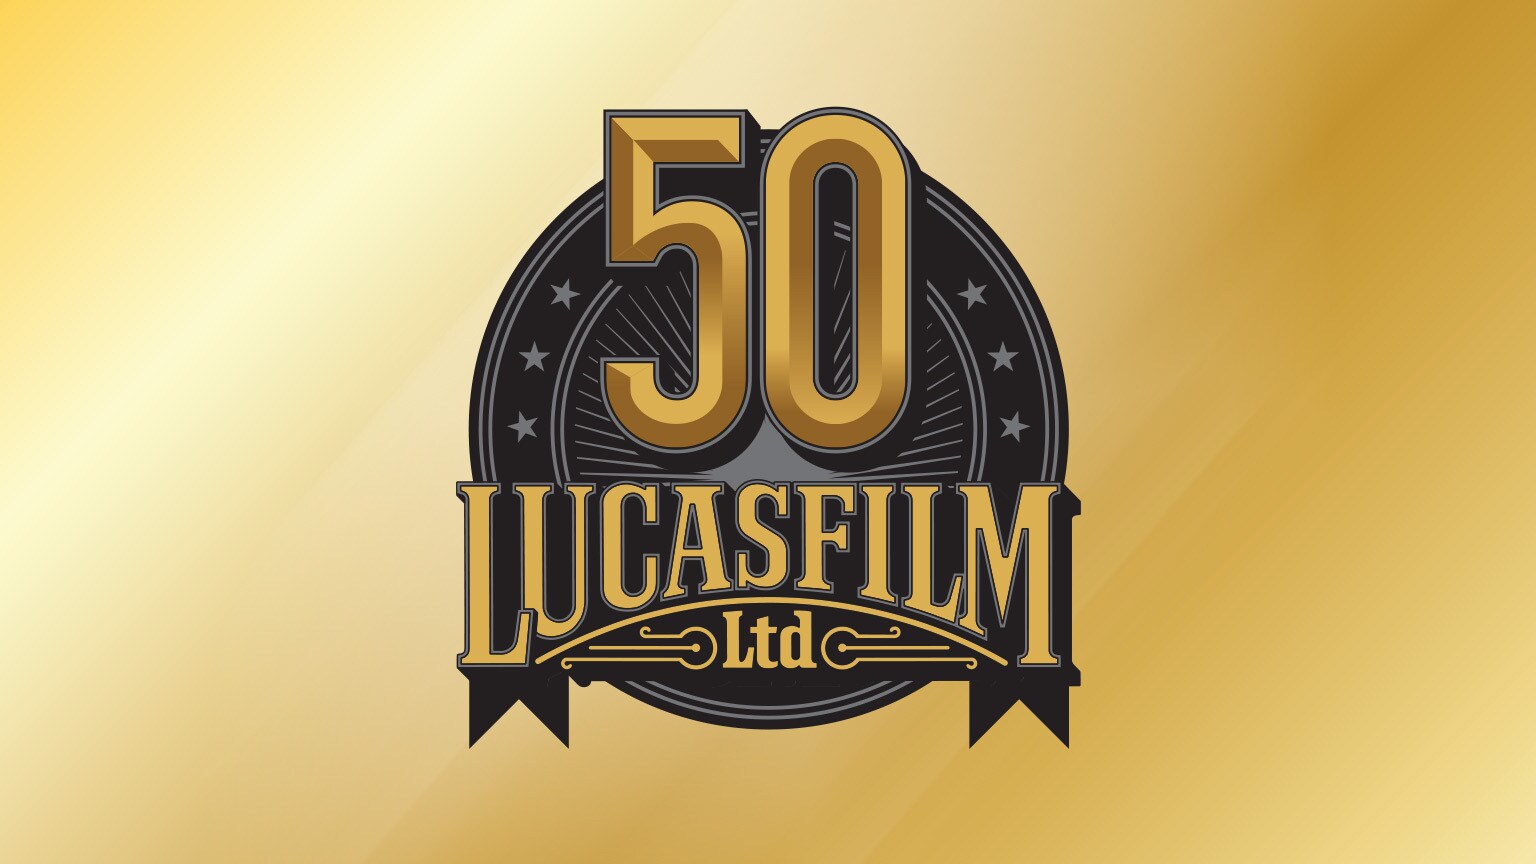 Lucasfilm to Celebrate 50th Anniversary in 2021